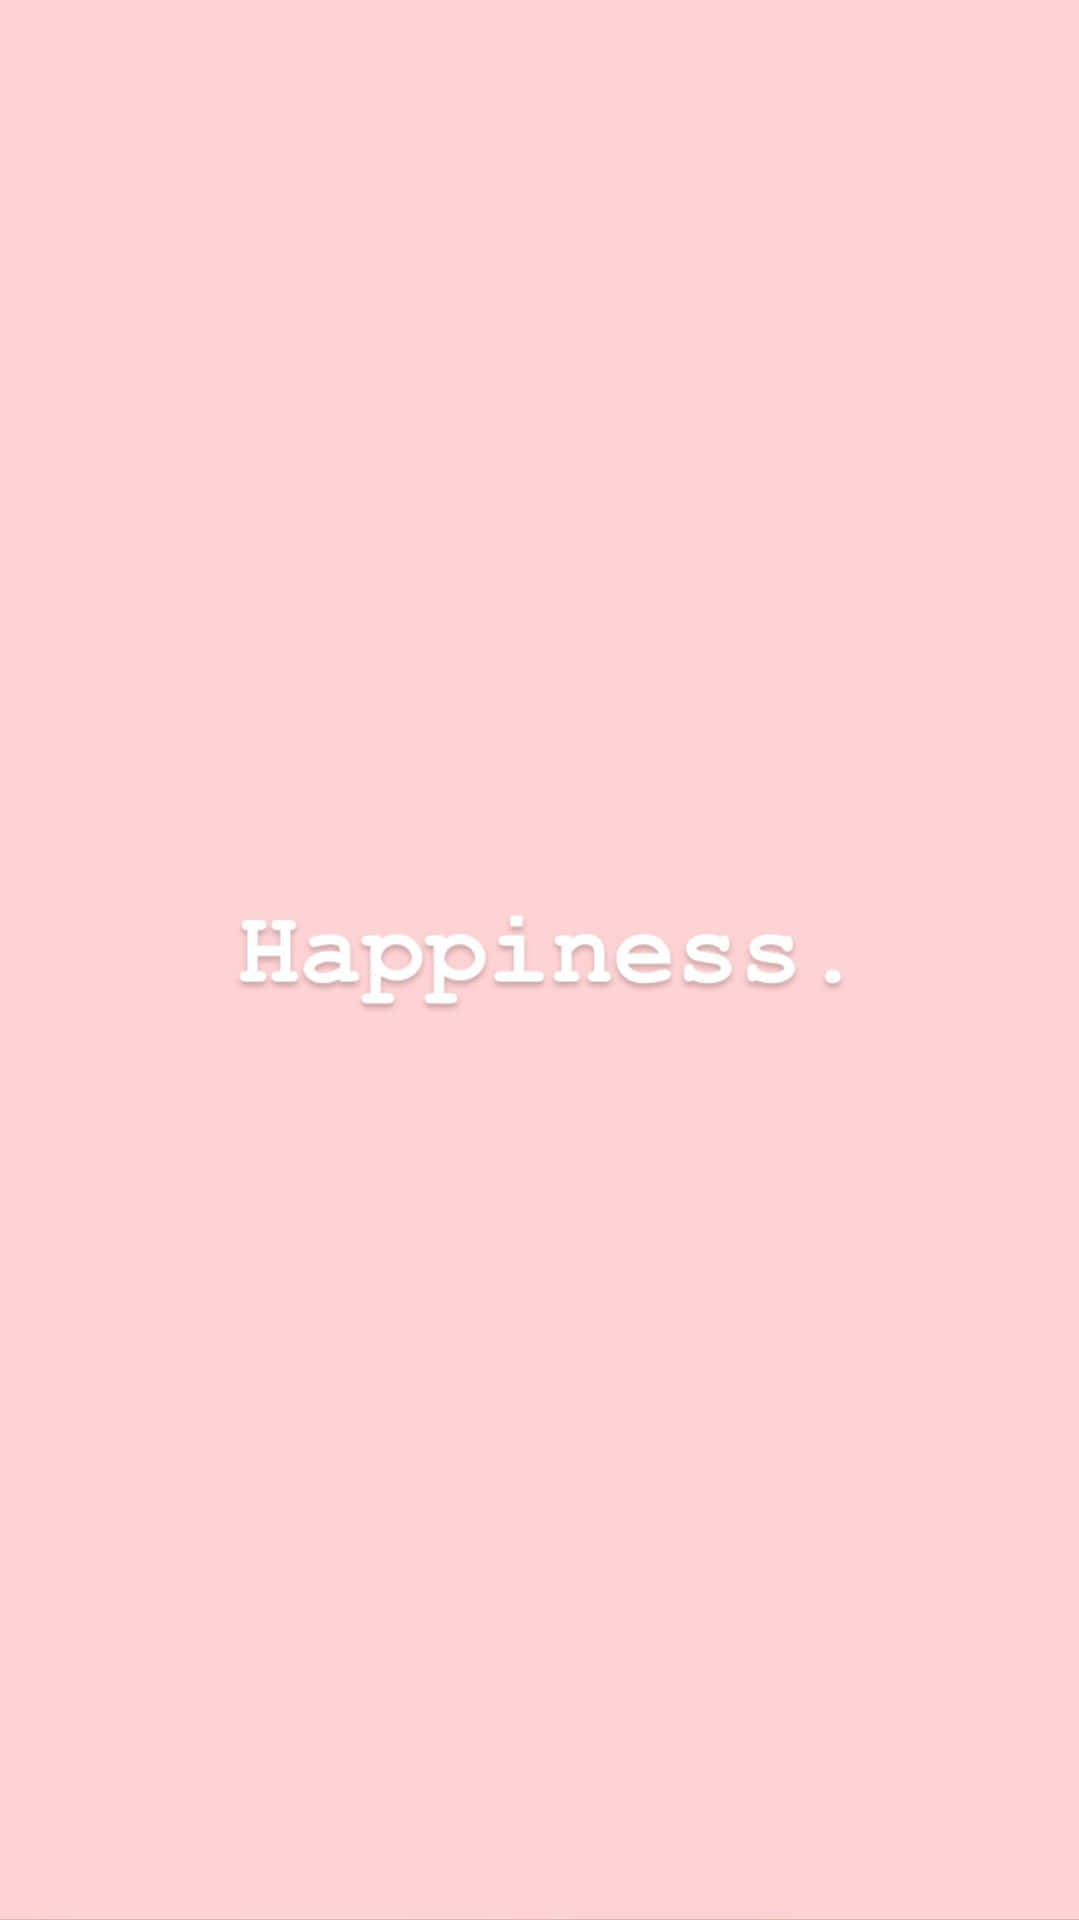 Happiness Pink Aesthetic Tumblr Wallpaper